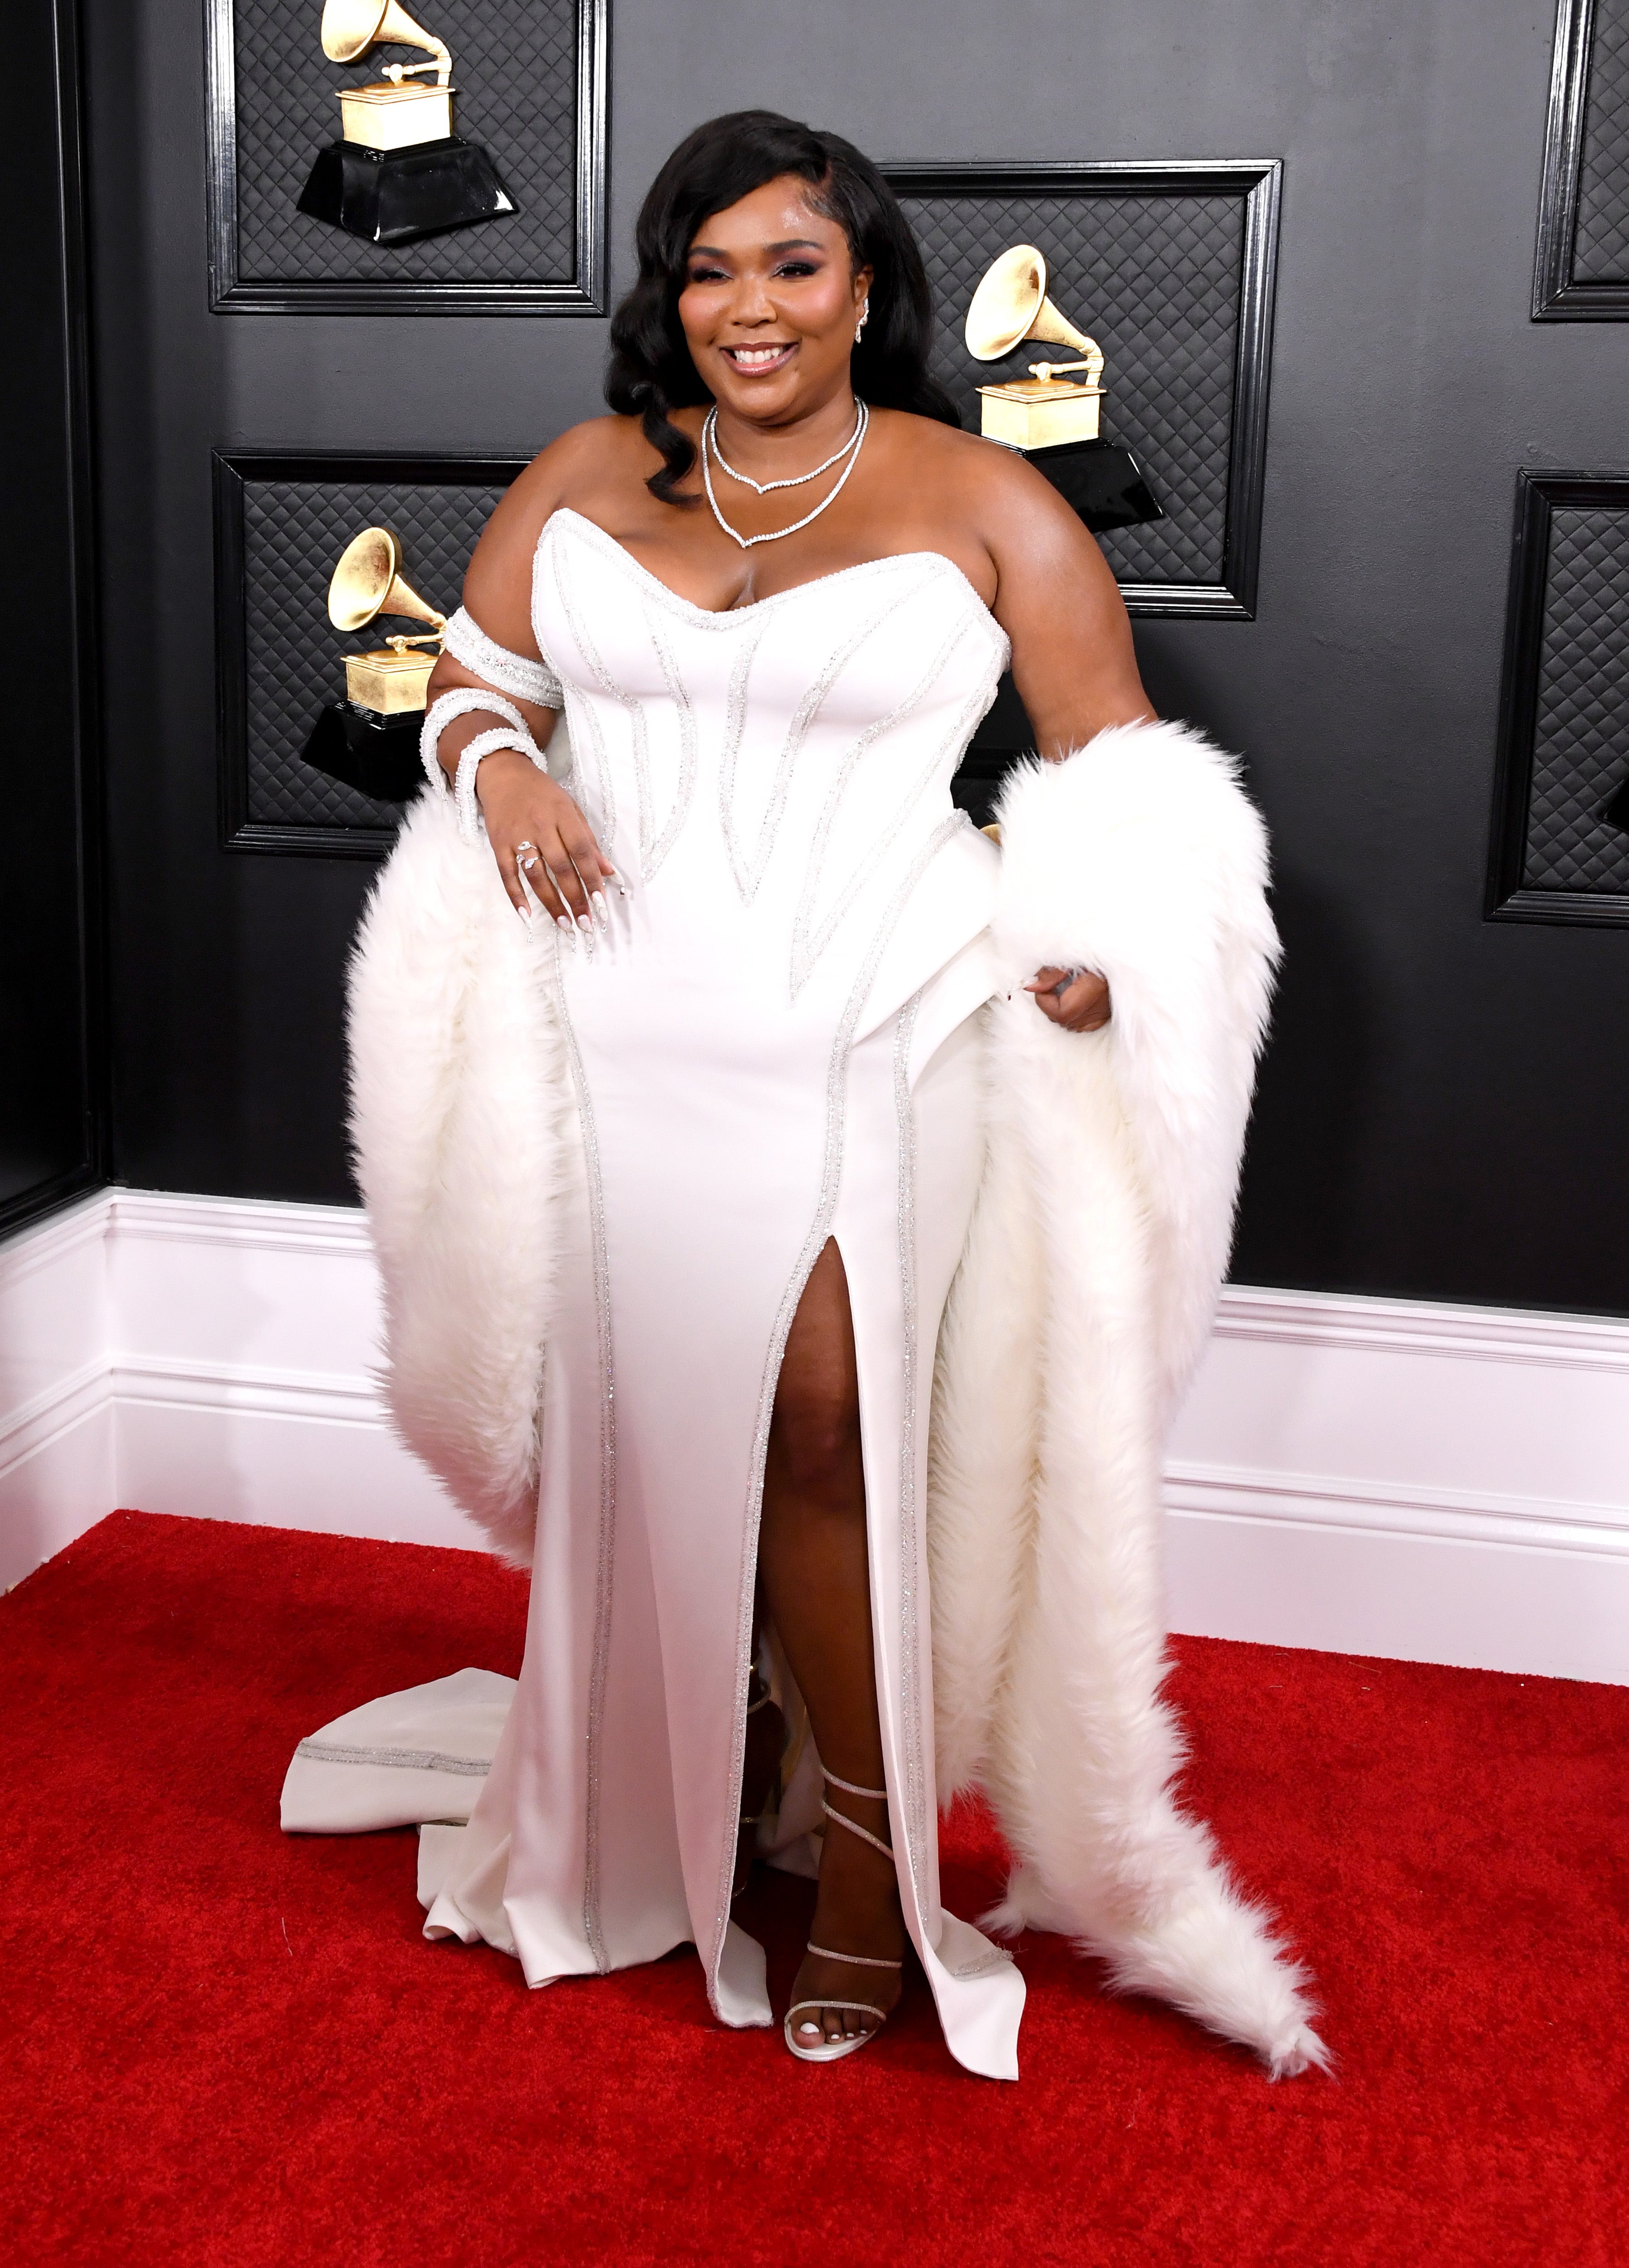 Lizzo Sports Sleek Versace Gown On The Grammy's Red Carpet